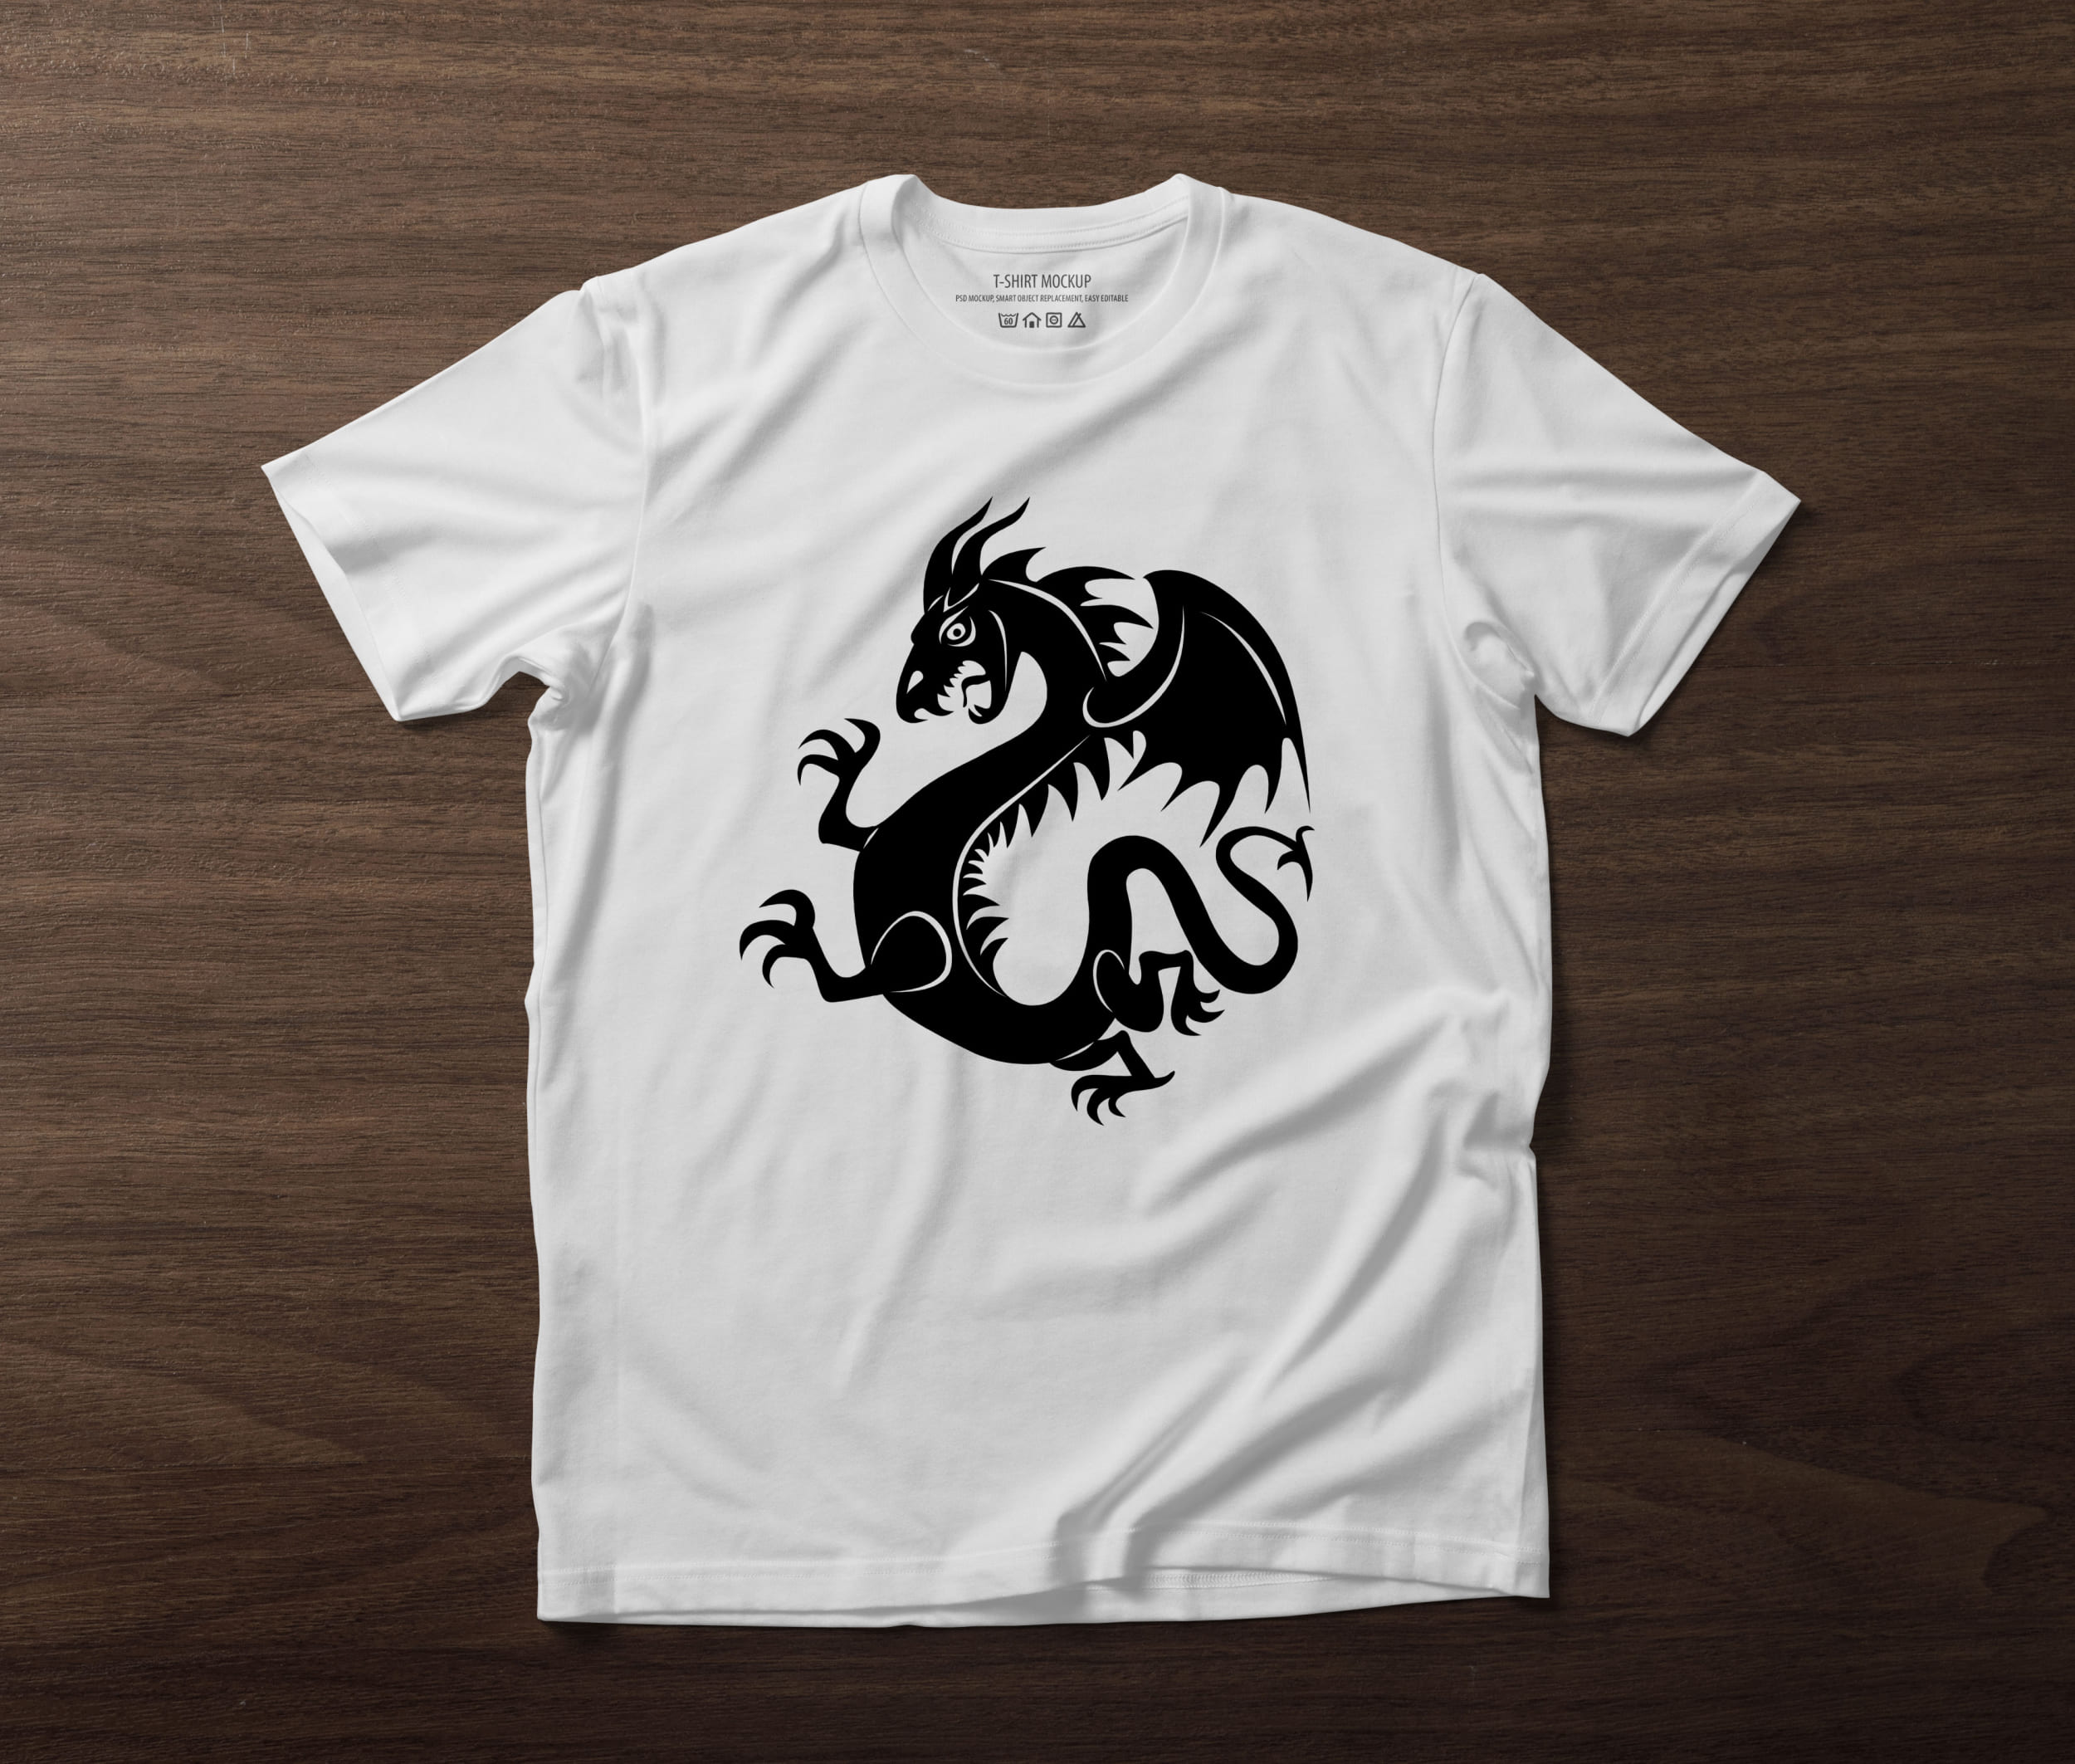 A white t-shirt on a table with a black silhouette of a dragon.